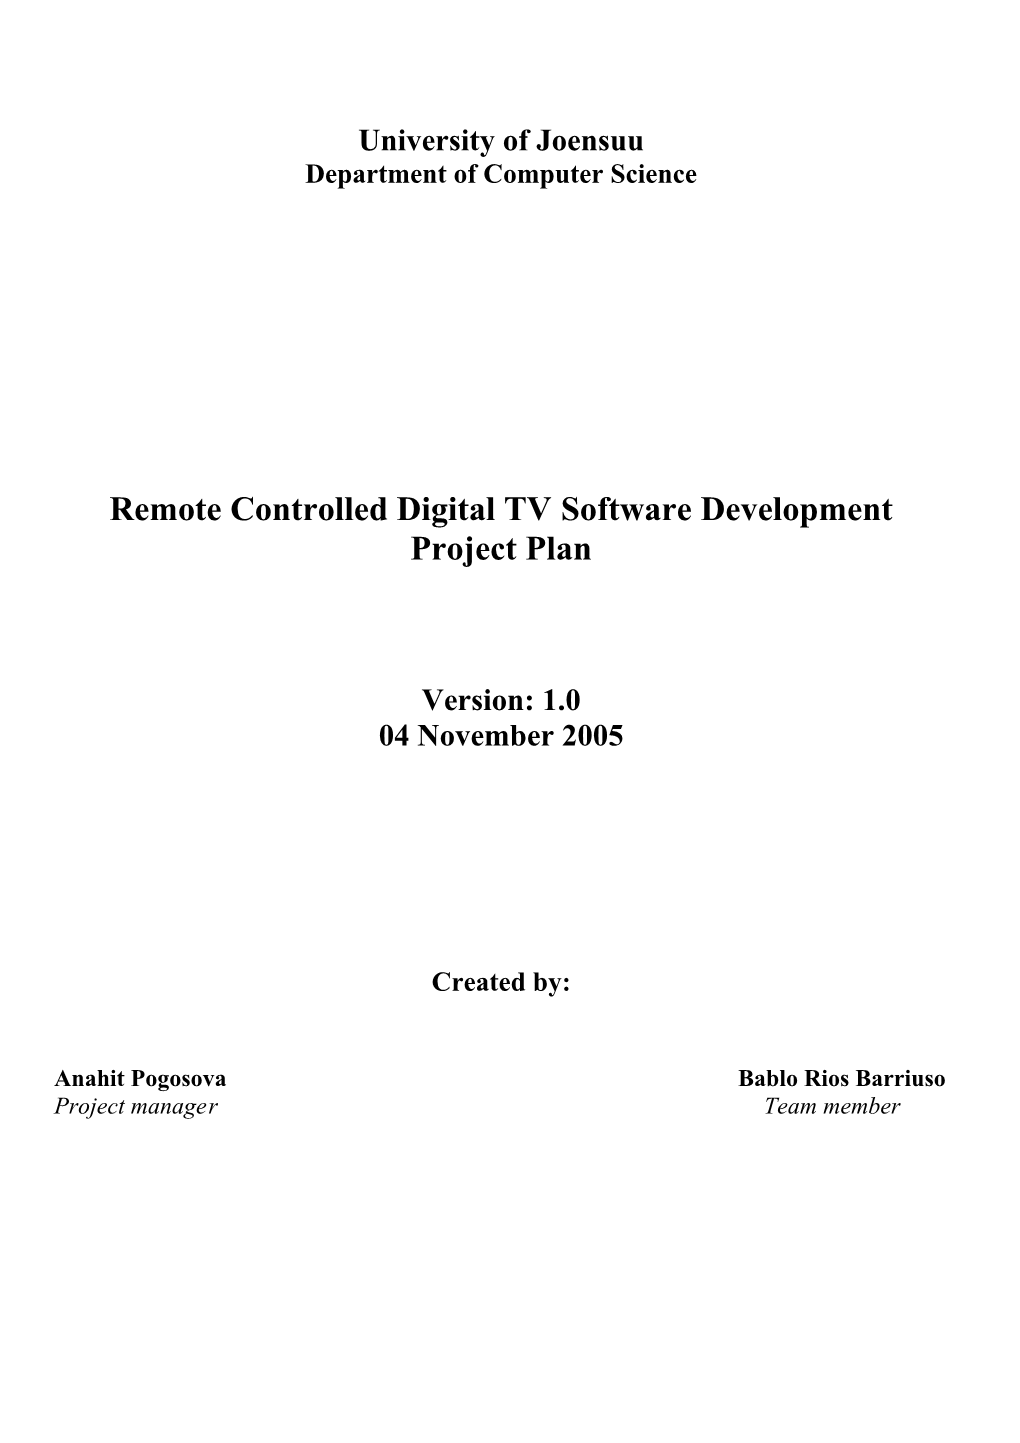 Remote Controlled Digital TV Software Development Project Plan